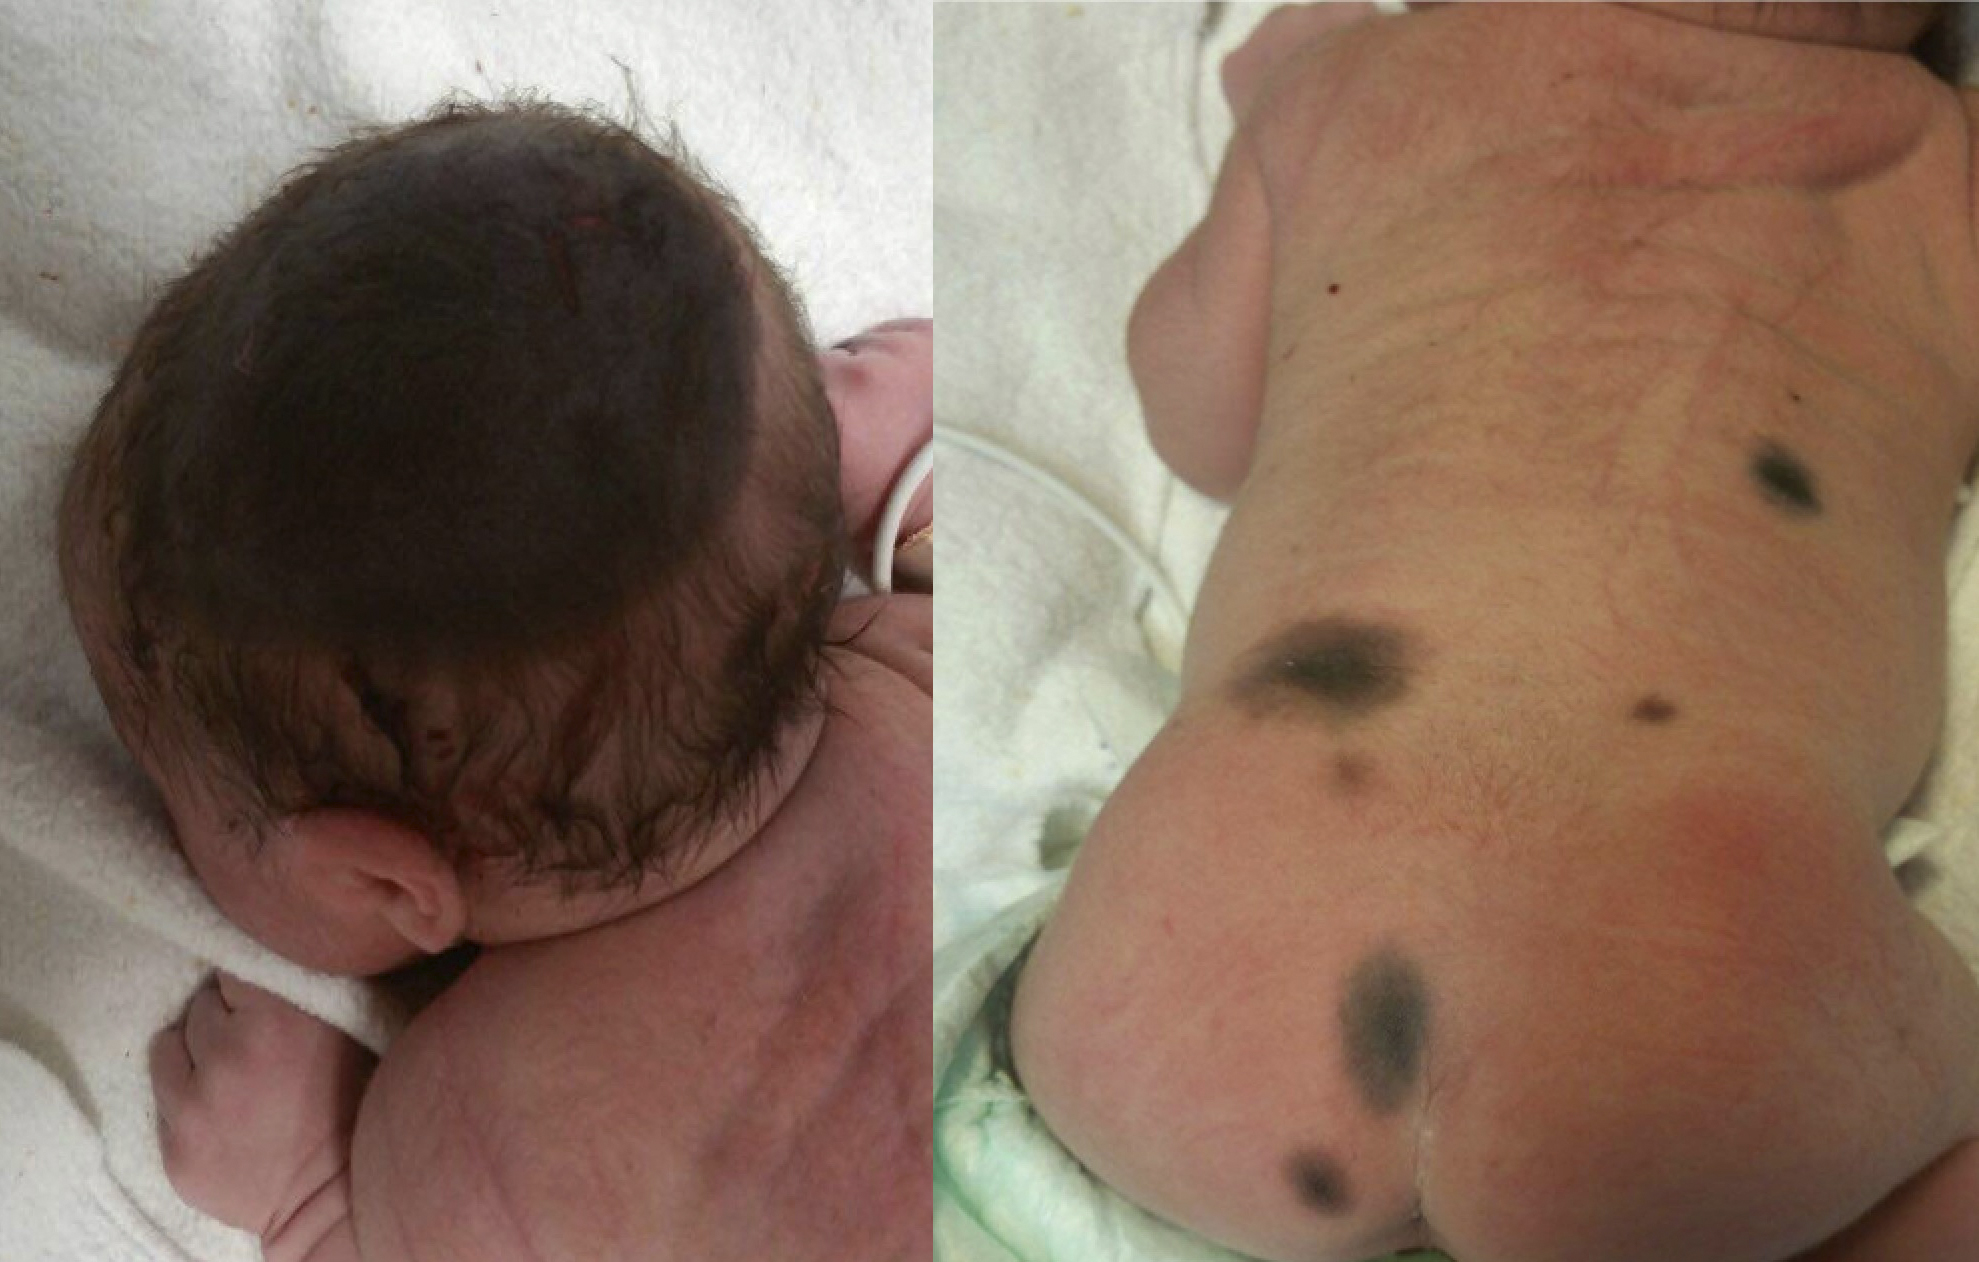 Giant congenital melanocytic nevus in a newborn (left) with satellite lesions on the patient's back and buttocks (right)